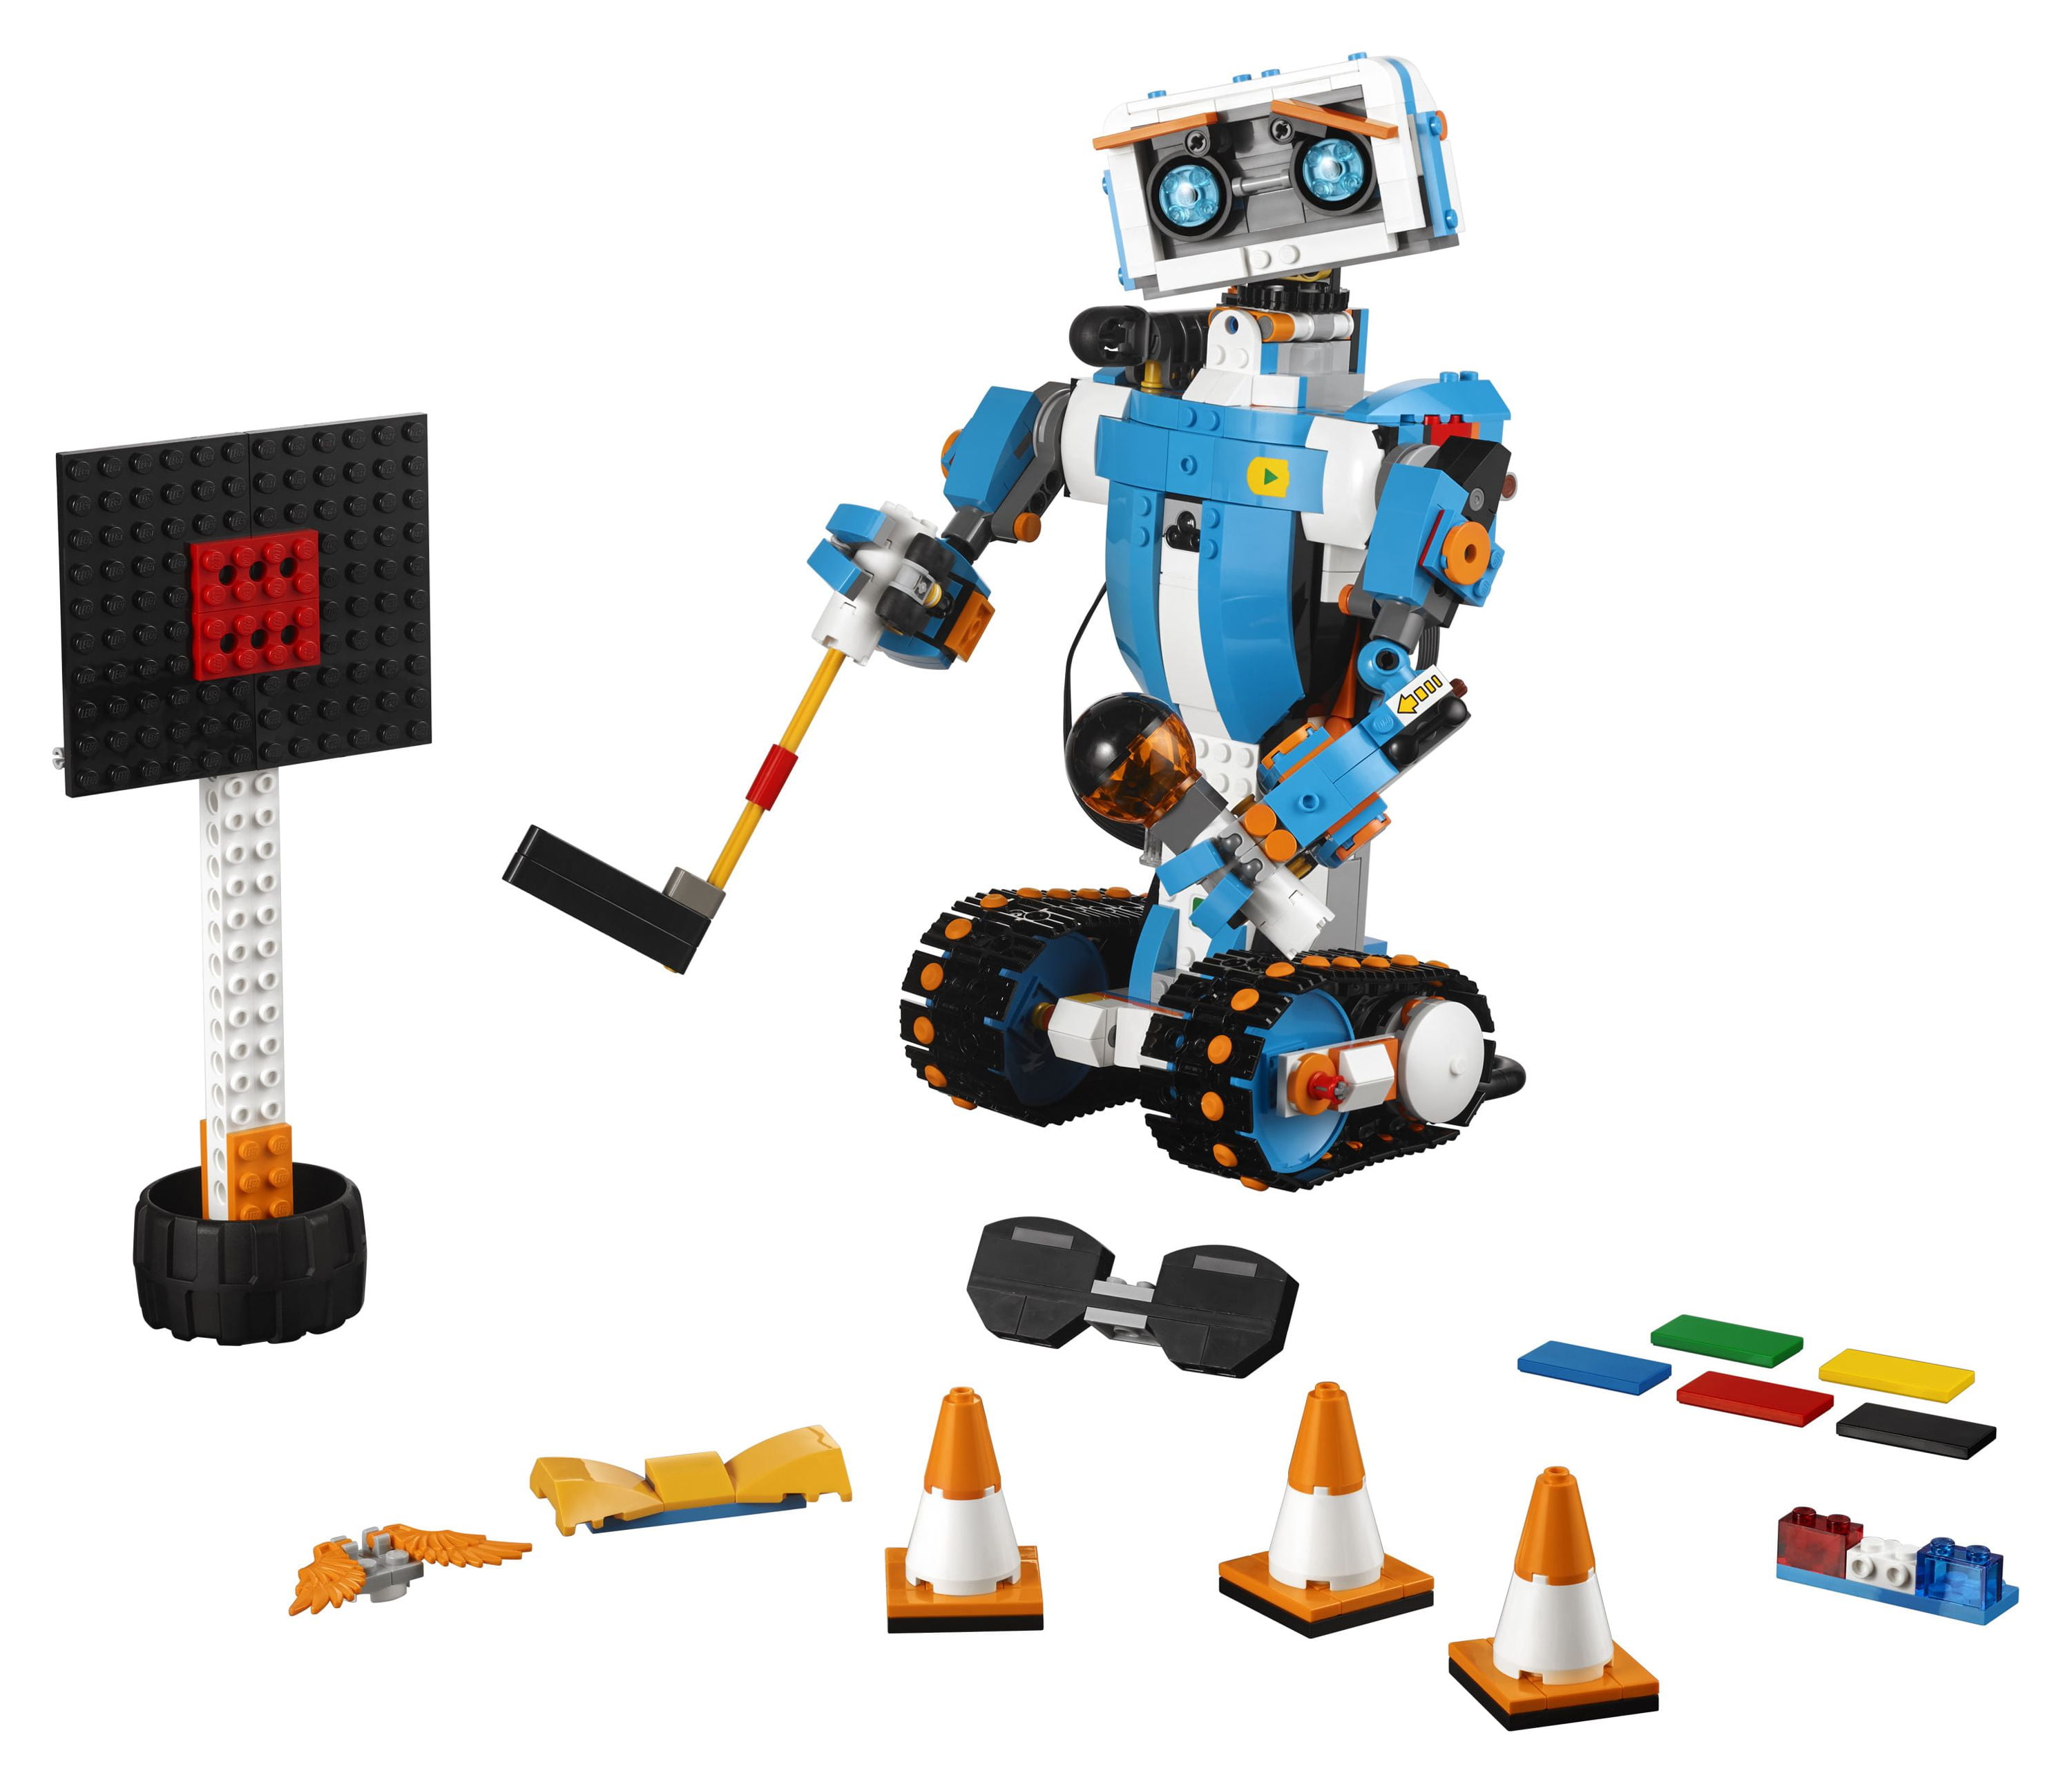 Lego Boost review: This is the crazy robot cat guitar kit you never knew  you wanted - CNET